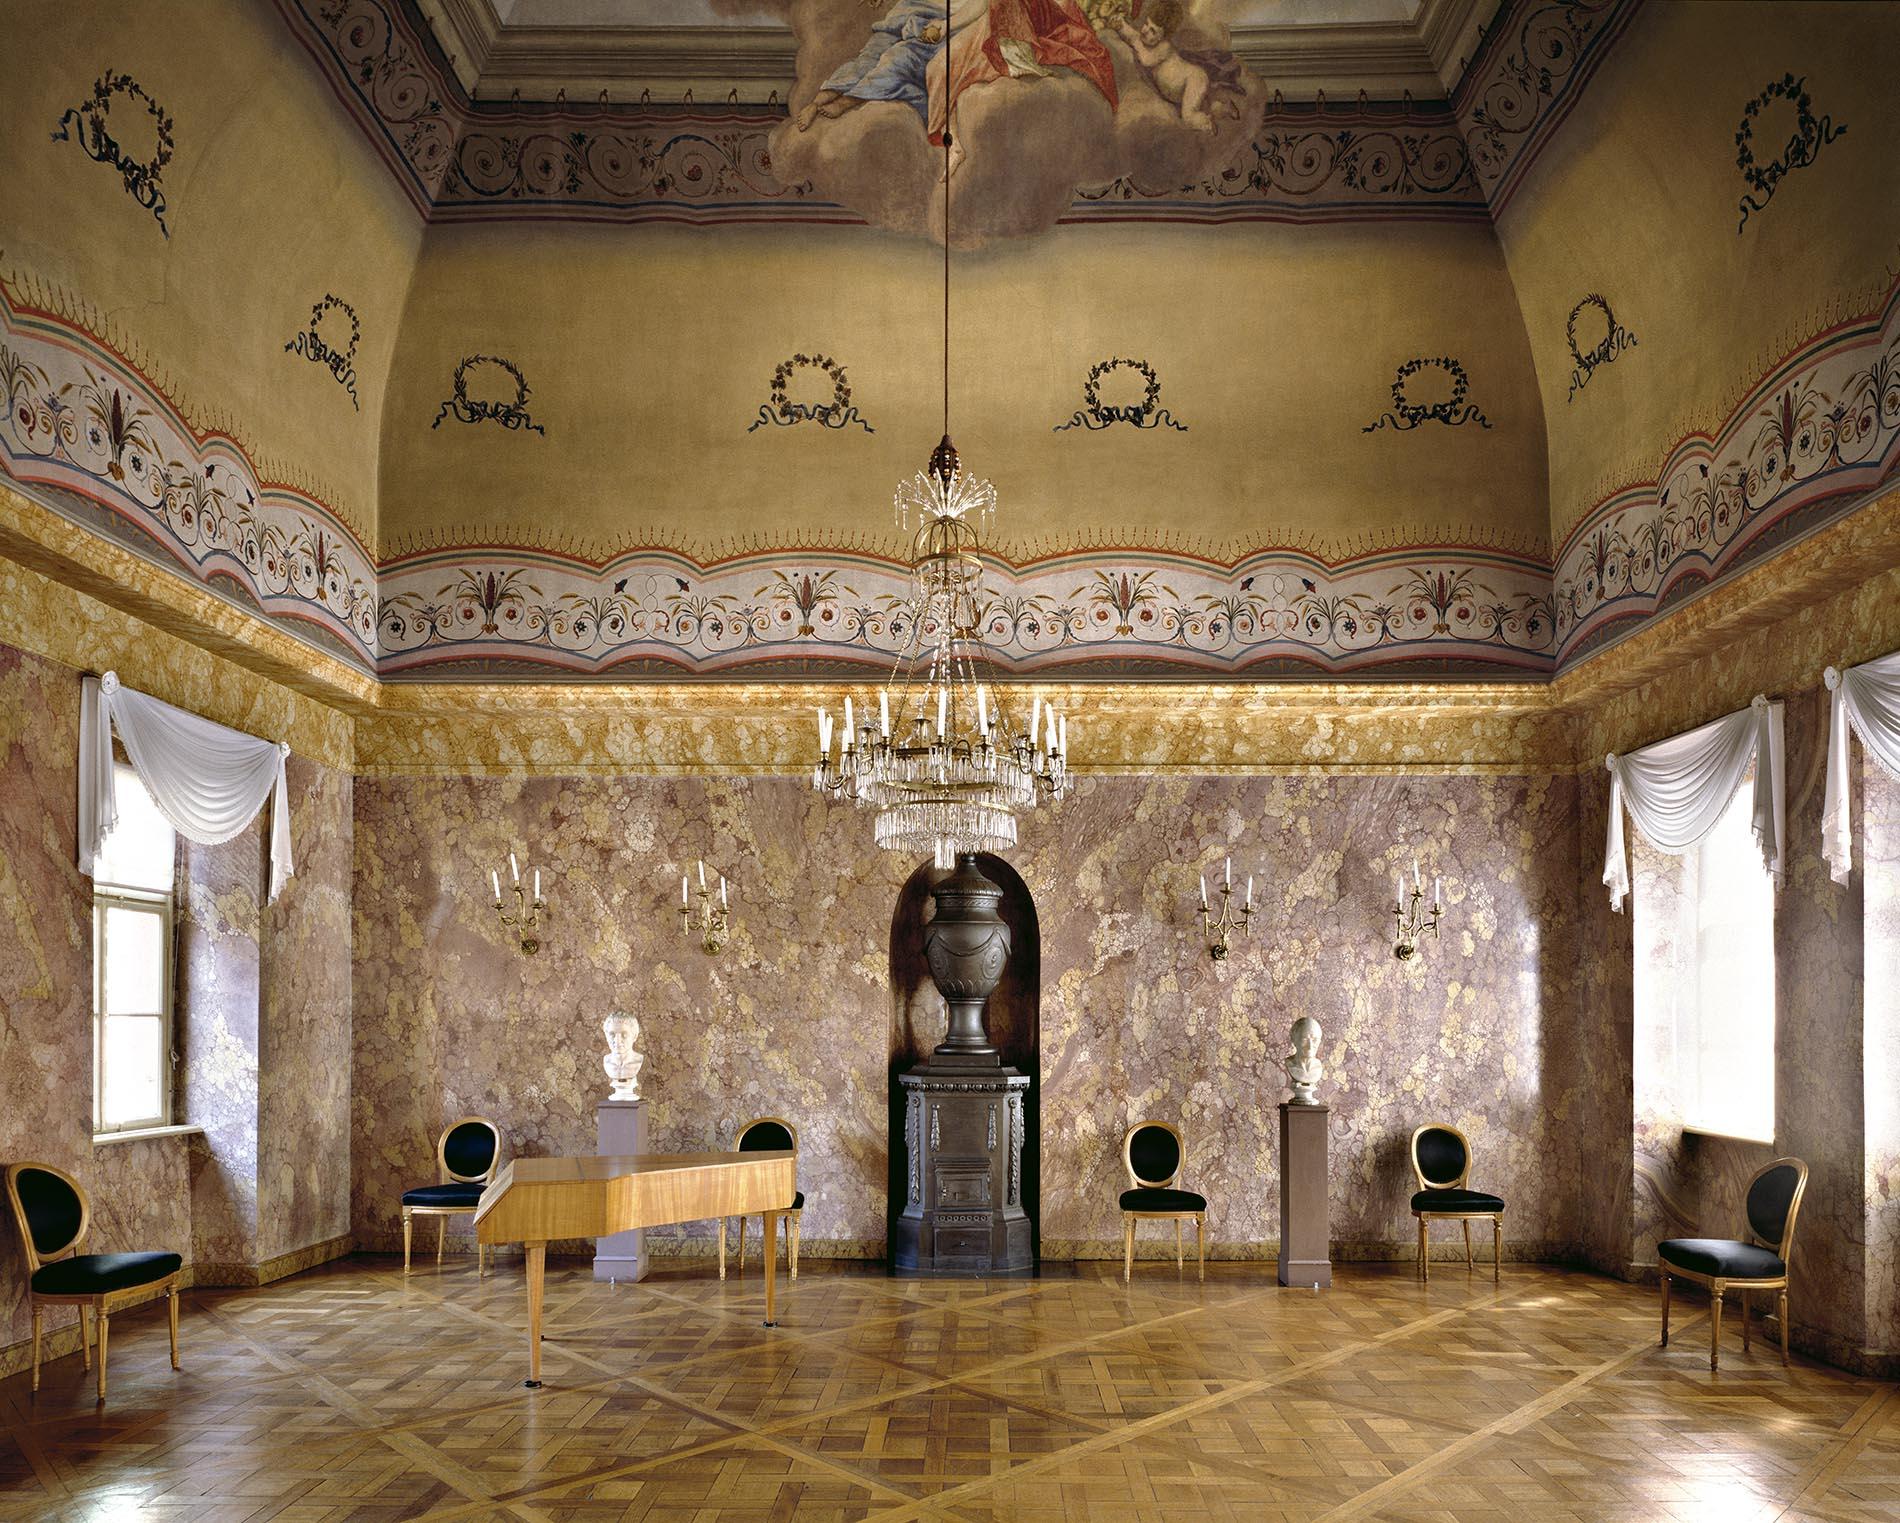 Massimo Listri
Palazzo Wittum, Weimar 1997
C print
Signed and numbered edition of 5

39.5 x 47 inches (100x120 cm) Edition of 5  
47.5 × 59 inches (120x150 cm) Edition of 5  
71 x 88.75 inches (180x225cm) Edition of 5

Florentine photographer